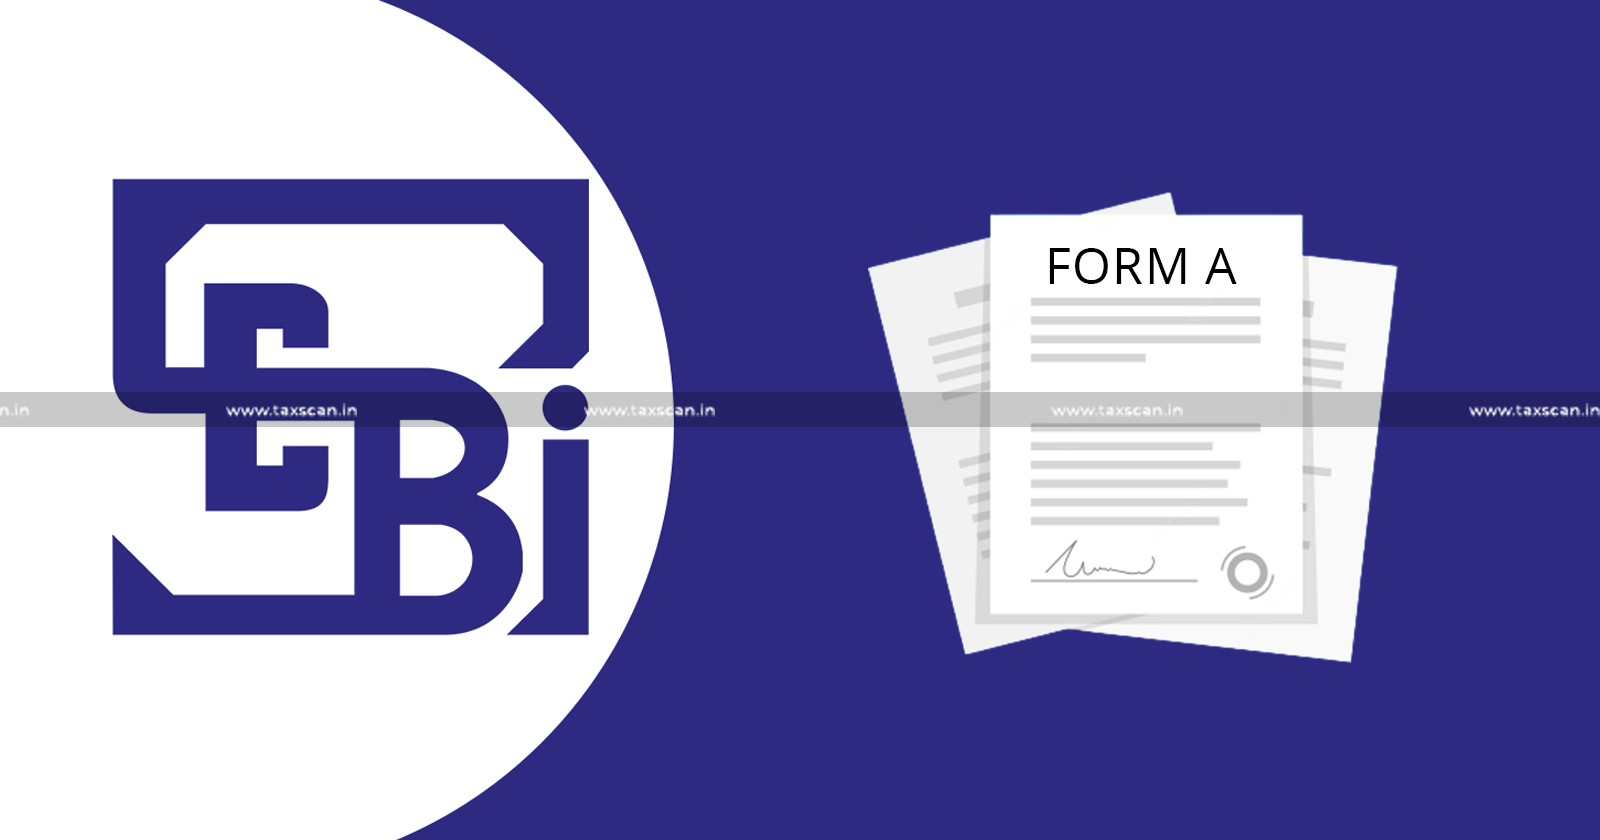 SEBI notifies Form A for Application - Certificate of Registration as ESG Rating Provider -Certificate of Registration - ESG Rating Provider - SEBI - taxscan